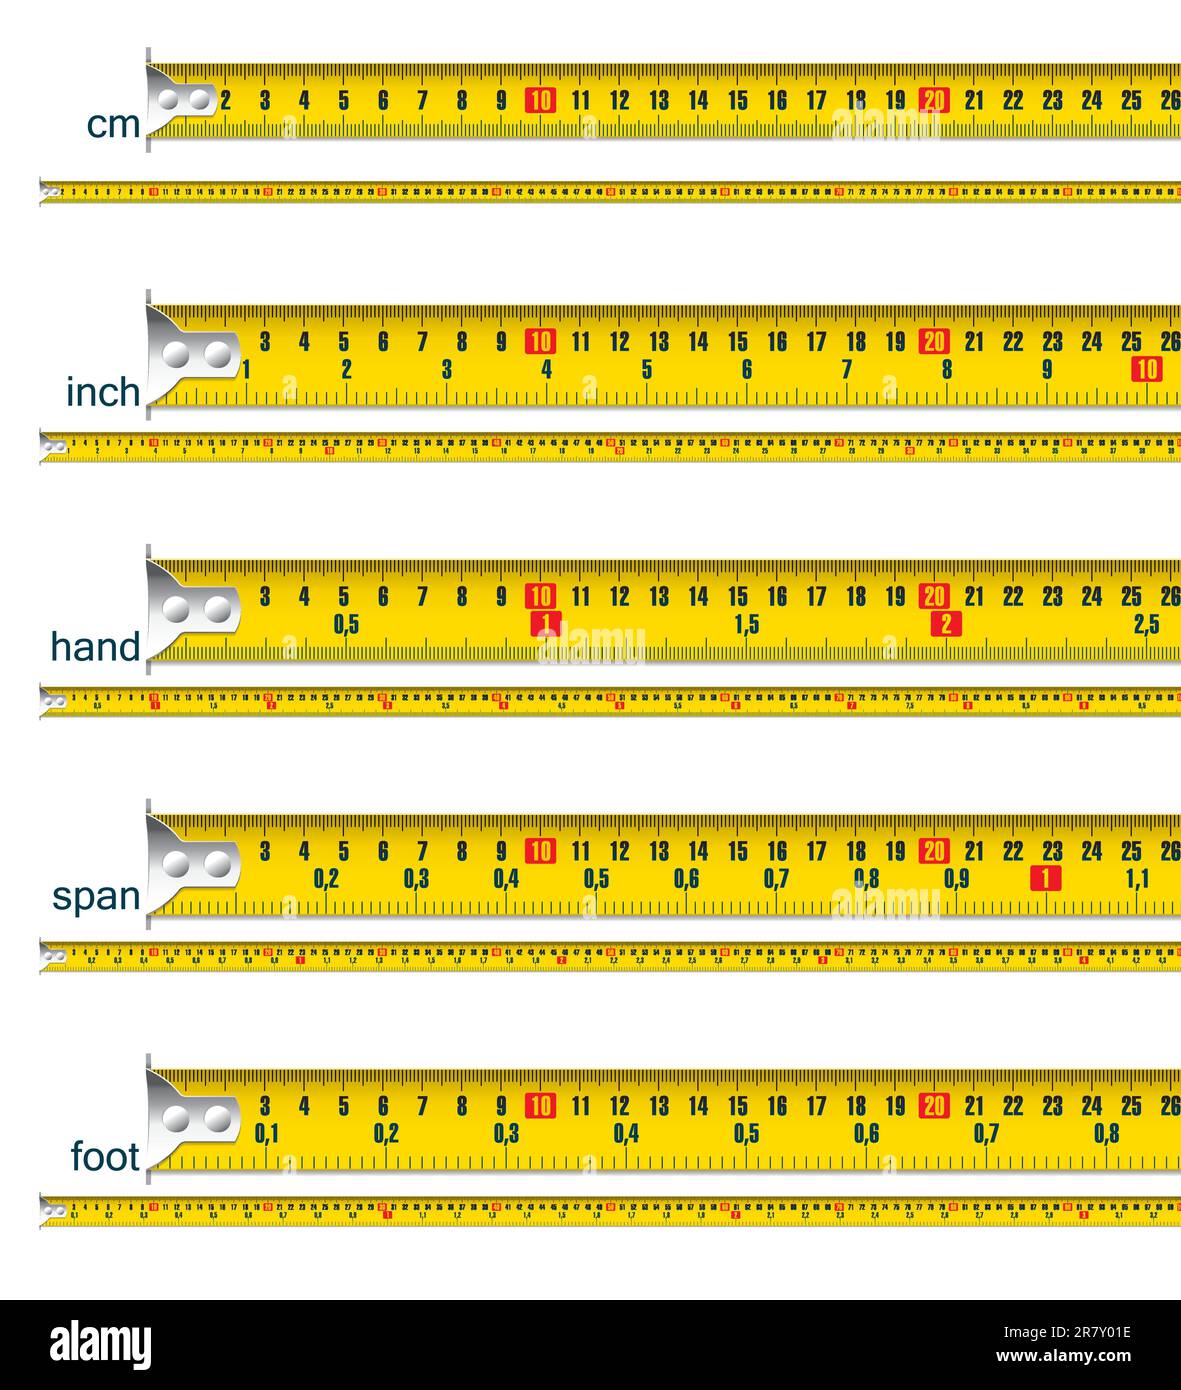 https://c8.alamy.com/comp/2R7Y01E/tape-measure-in-cm-cm-and-inch-cm-and-hand-cm-and-span-cm-and-foot-vector-illustration-2R7Y01E.jpg